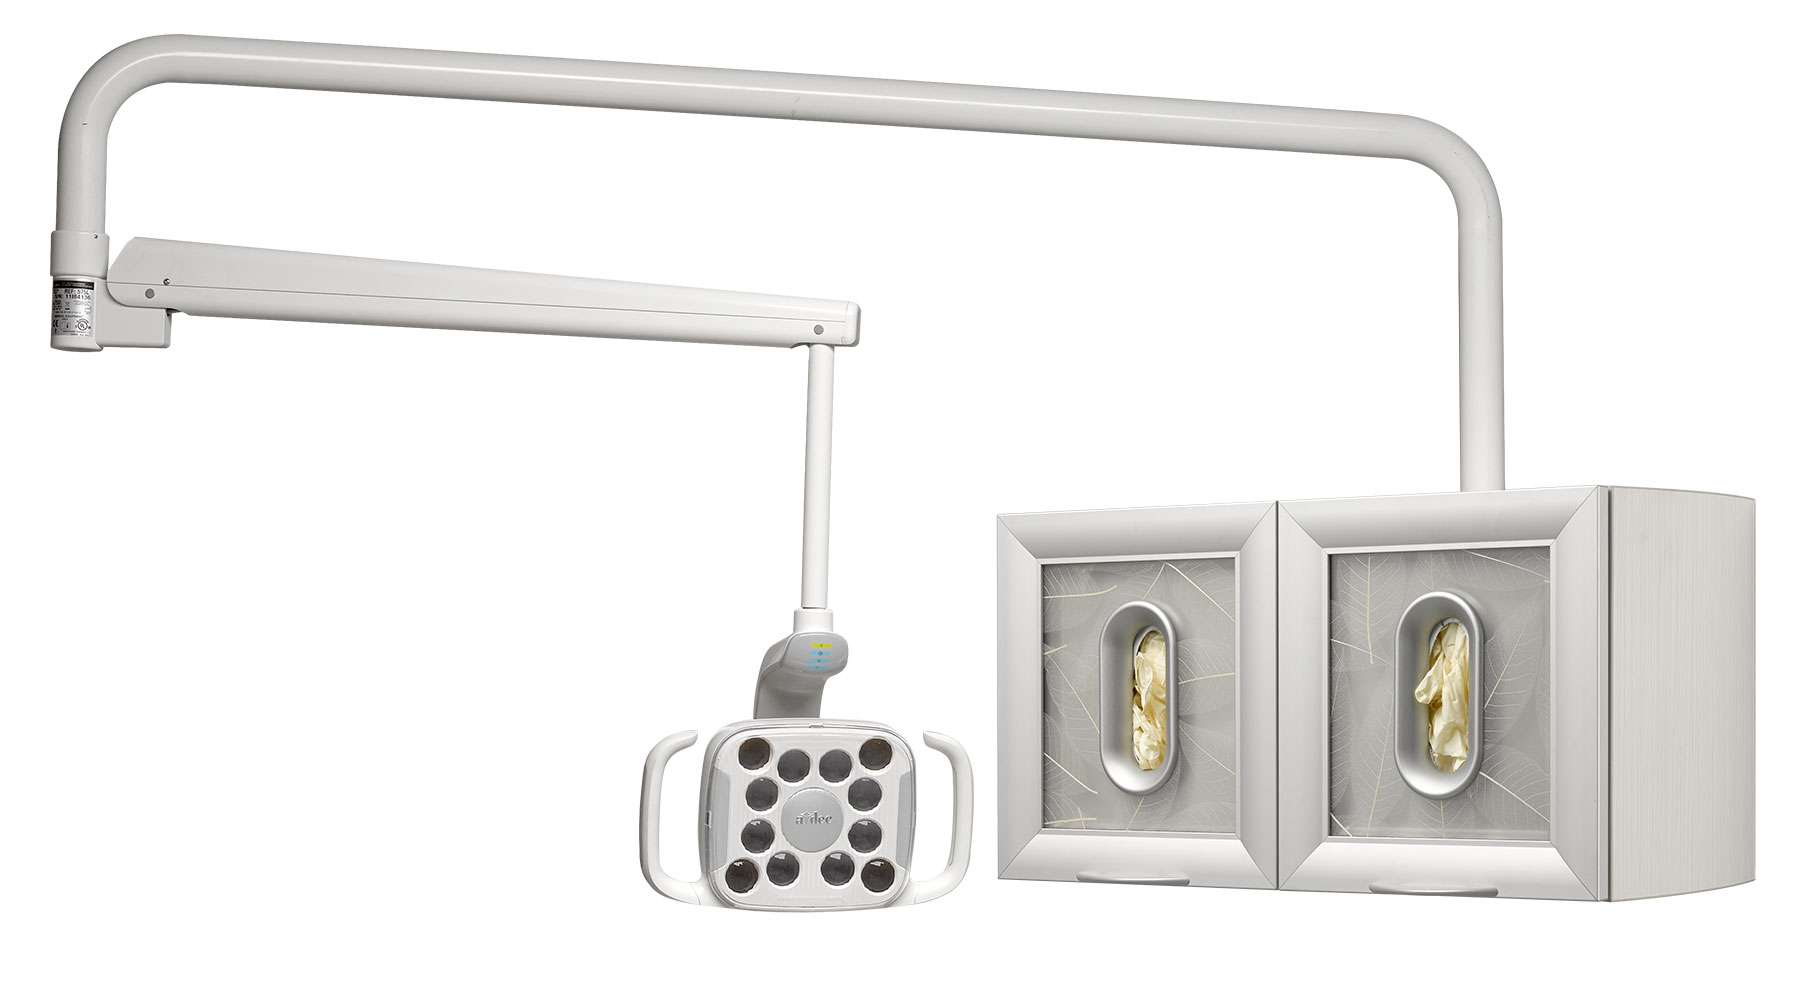 A-dec Inspire 595 wall-mounted cabinets in white with dental light mount